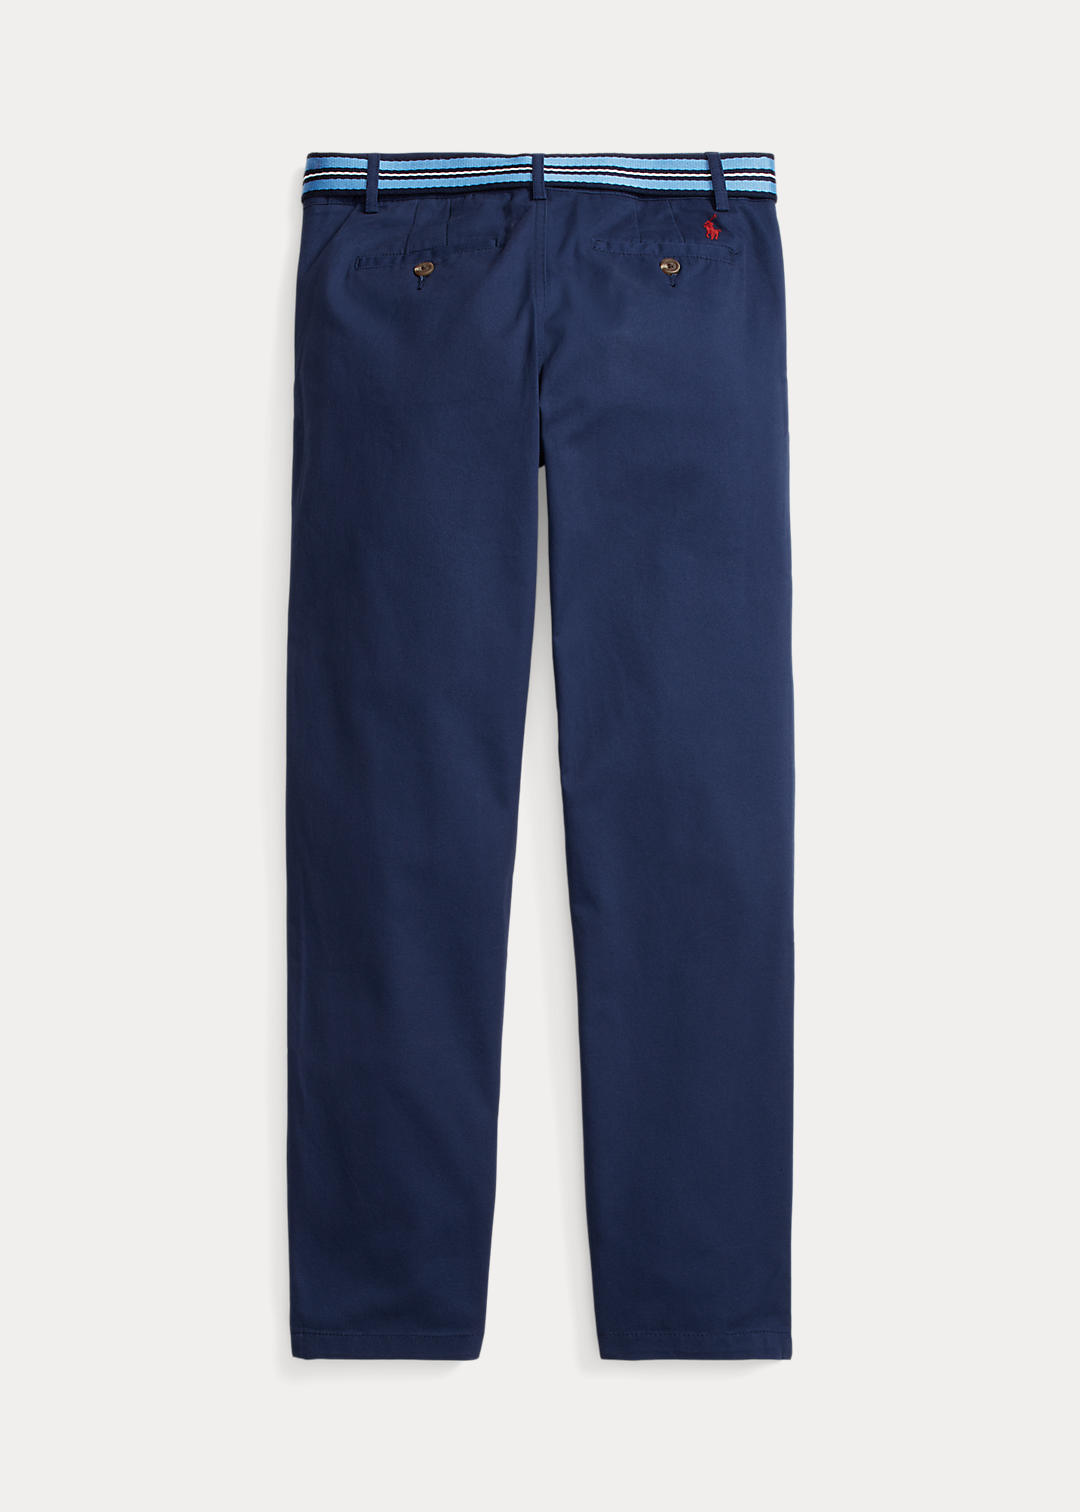 Boys 8-18 Belted Slim Fit Stretch Twill Trouser 2